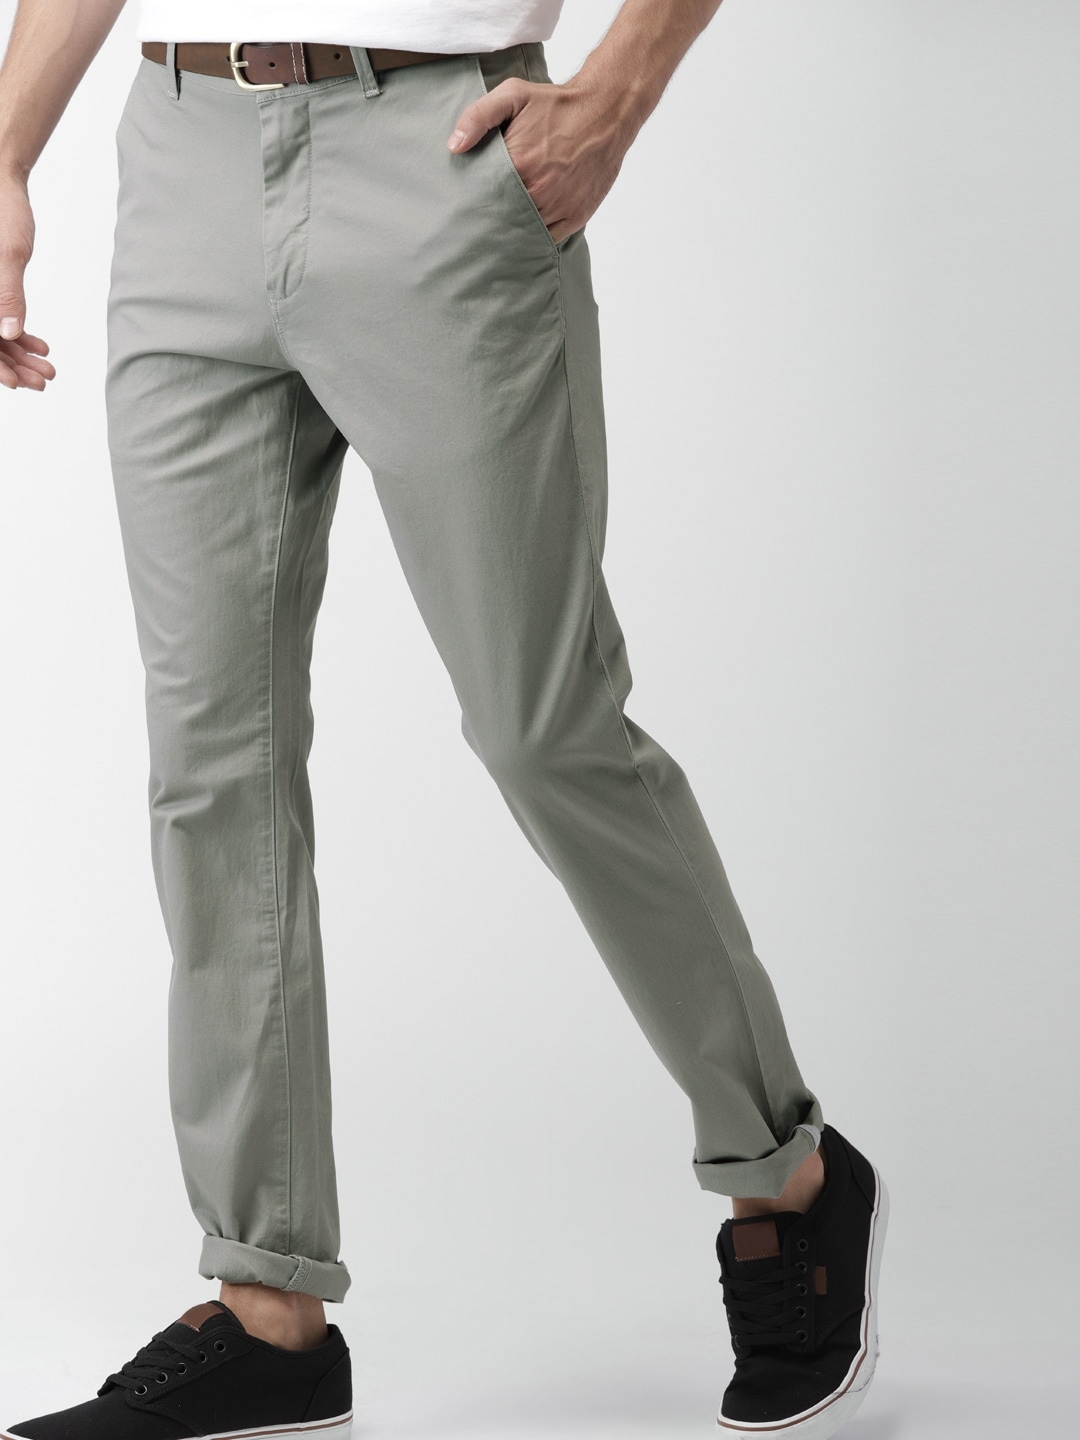 Buy Dark Grey Chinos for Men Online in India at Beyoung